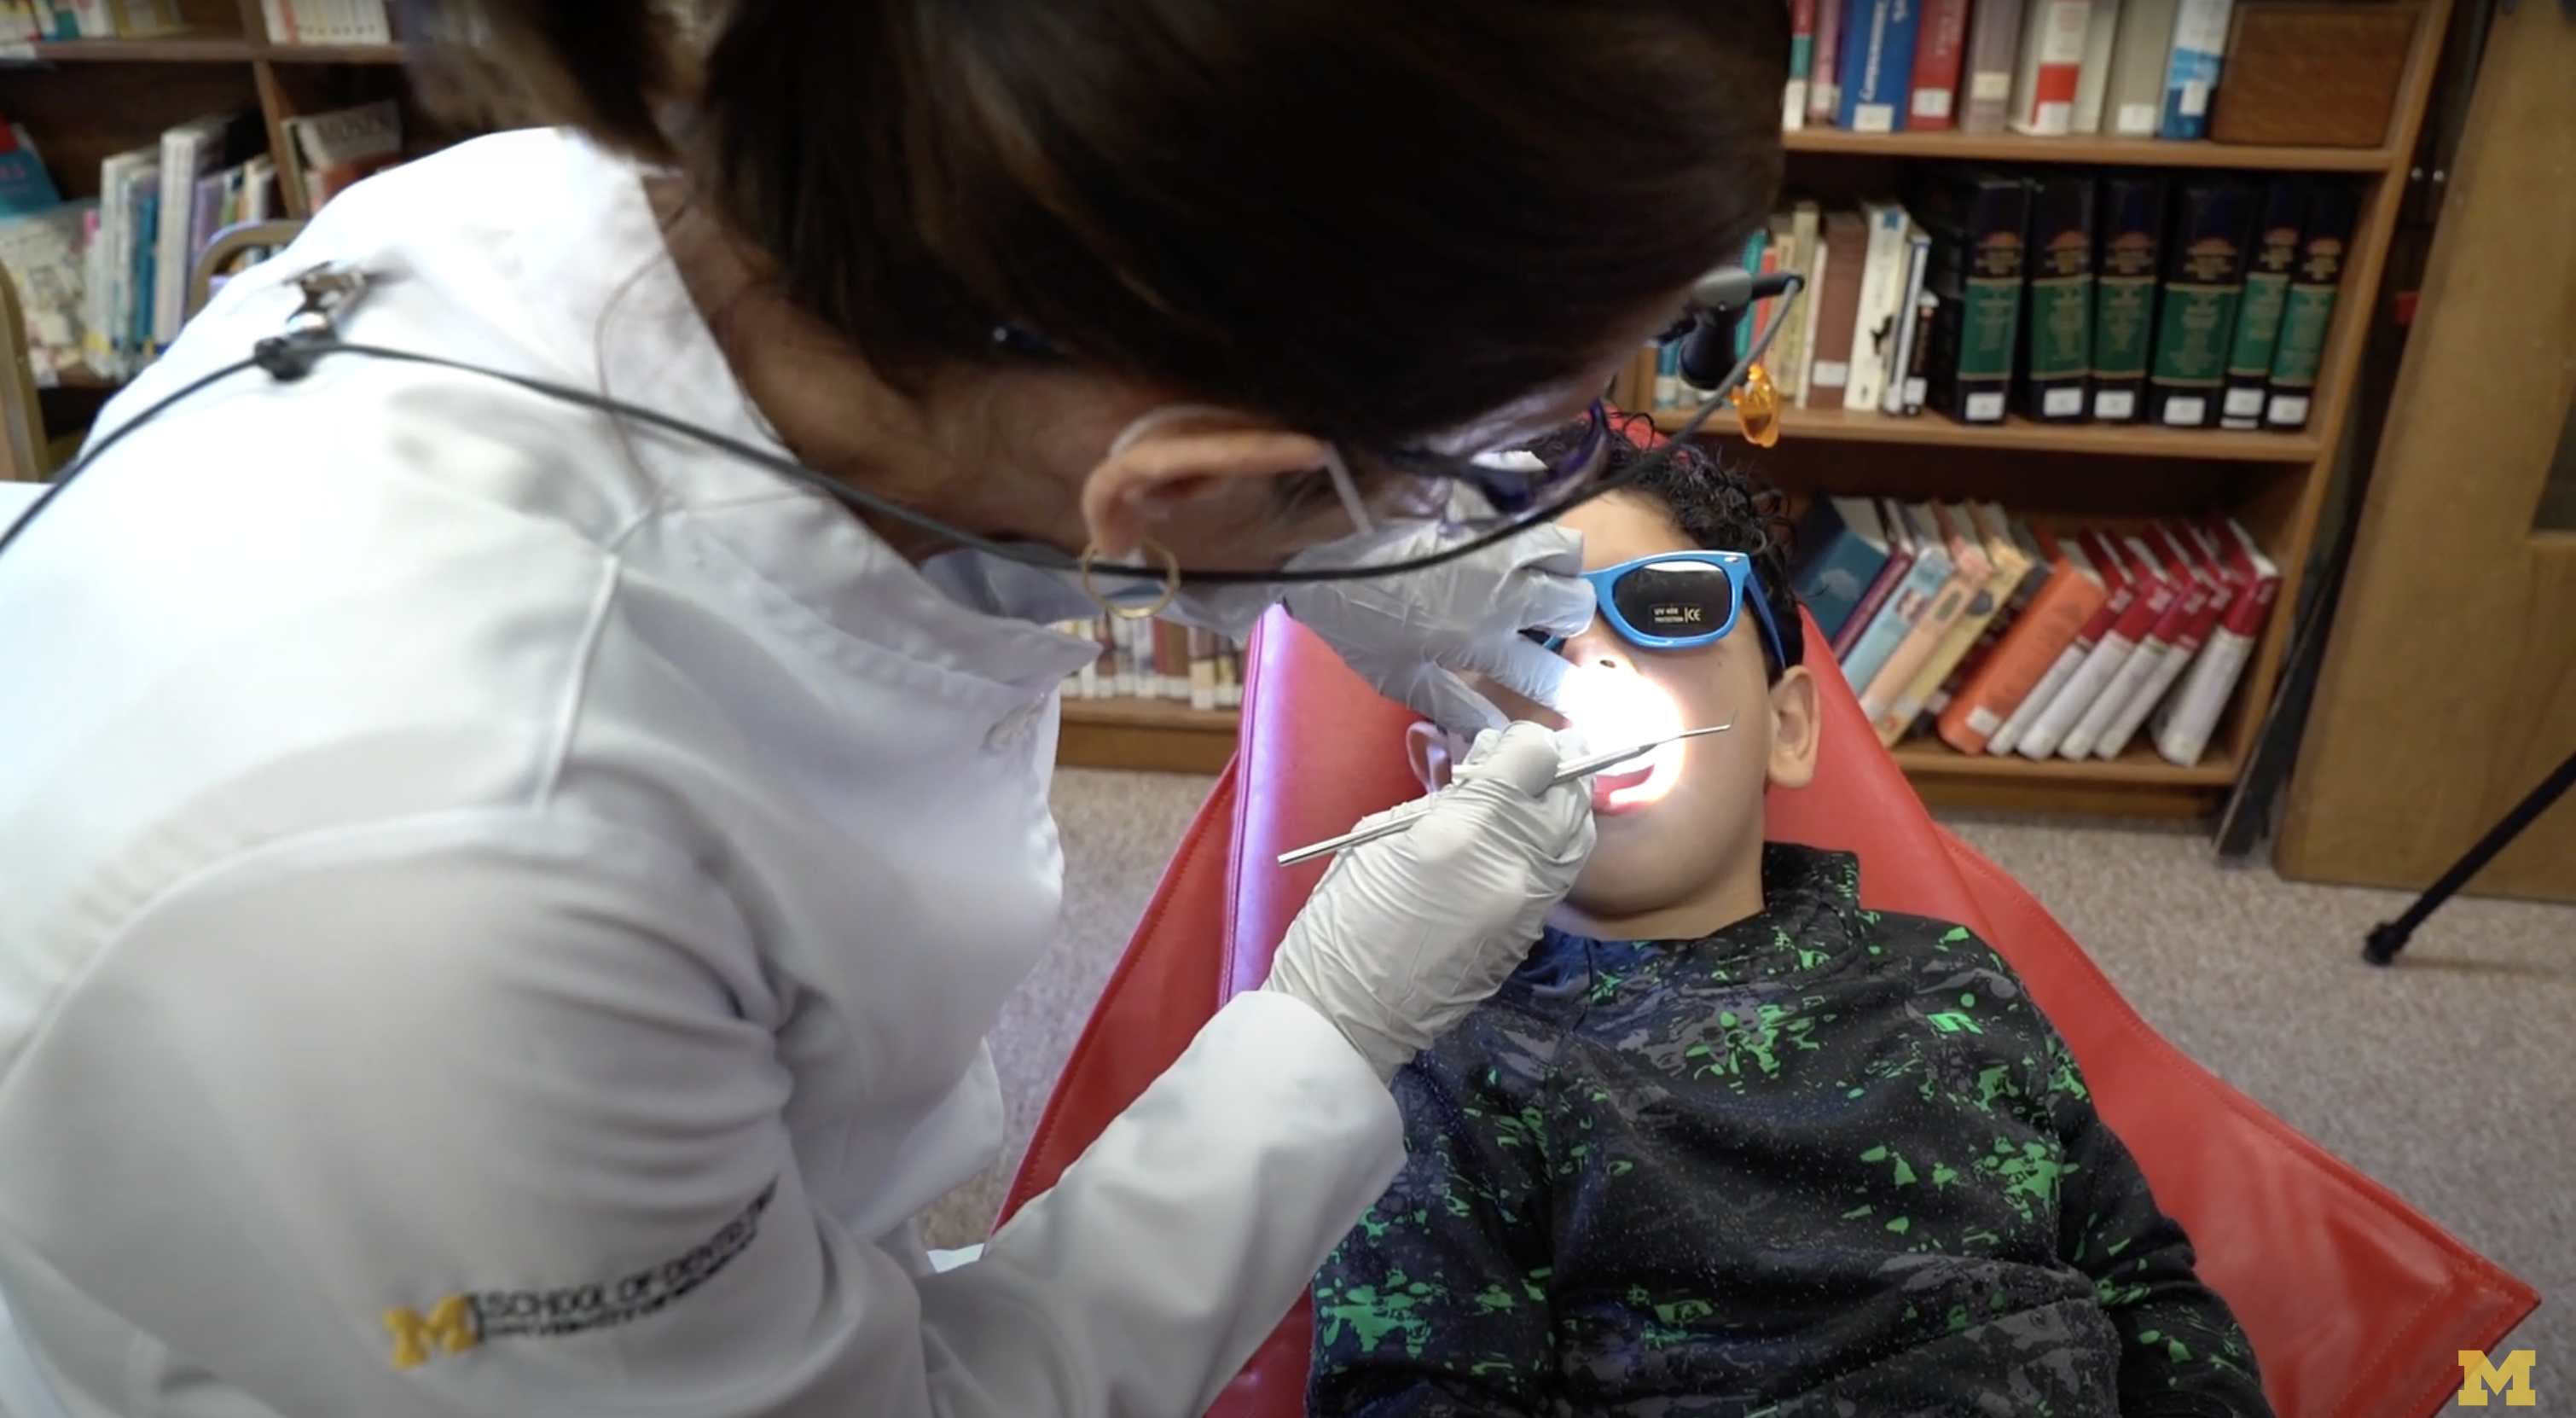 A clinical trial participant receives an oral exam at school from a dental clinician on the the study. 